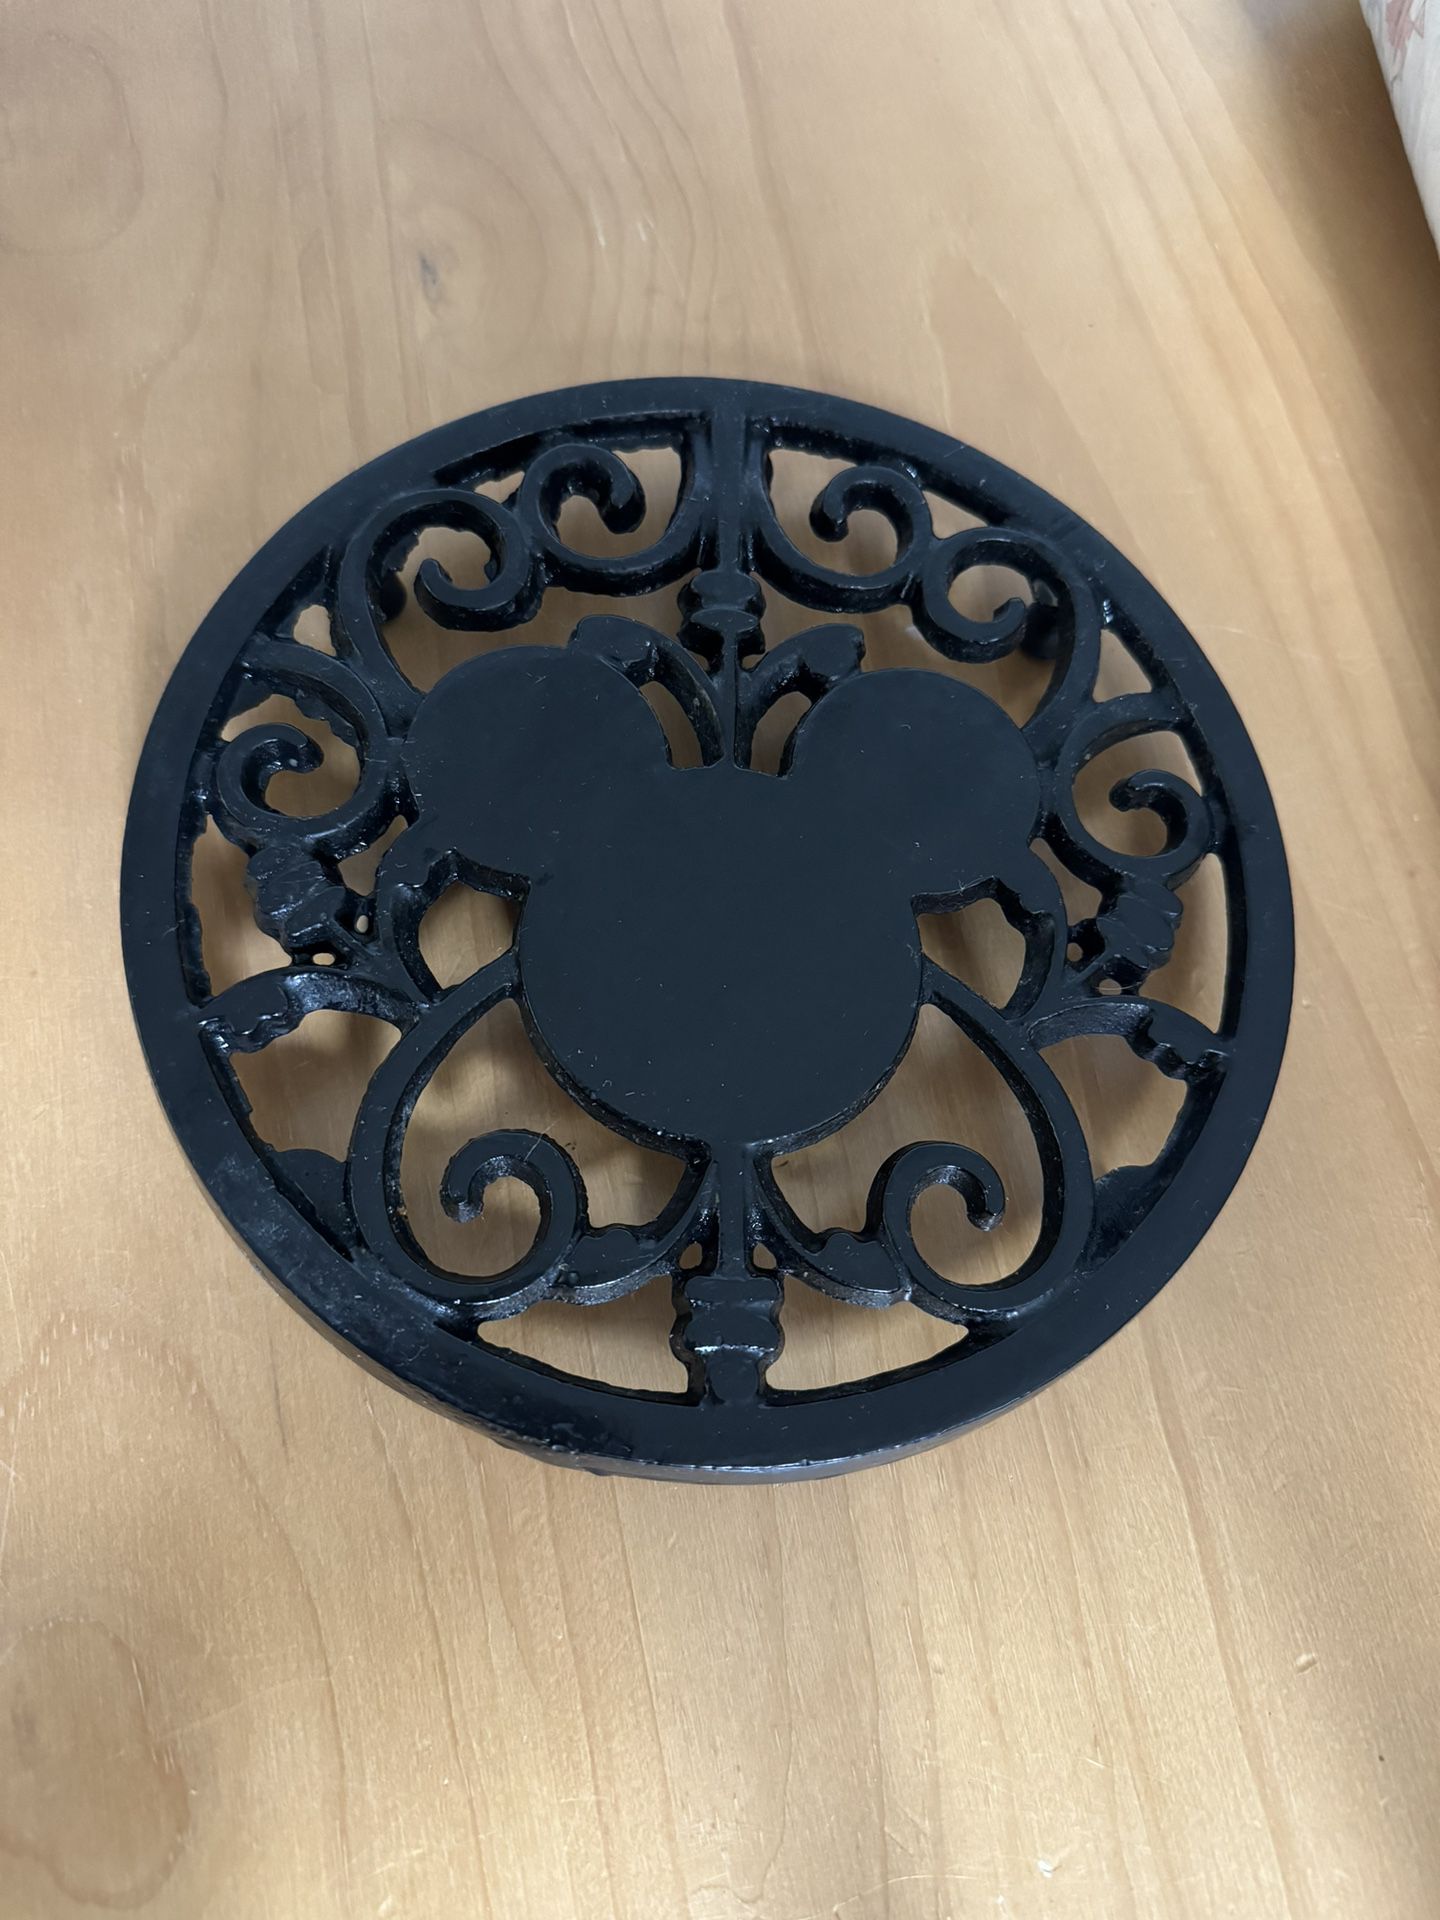 Disney Cast Iron Trivet Gourmet Mickey Mouse Hot Pad Black 7.5 Inches